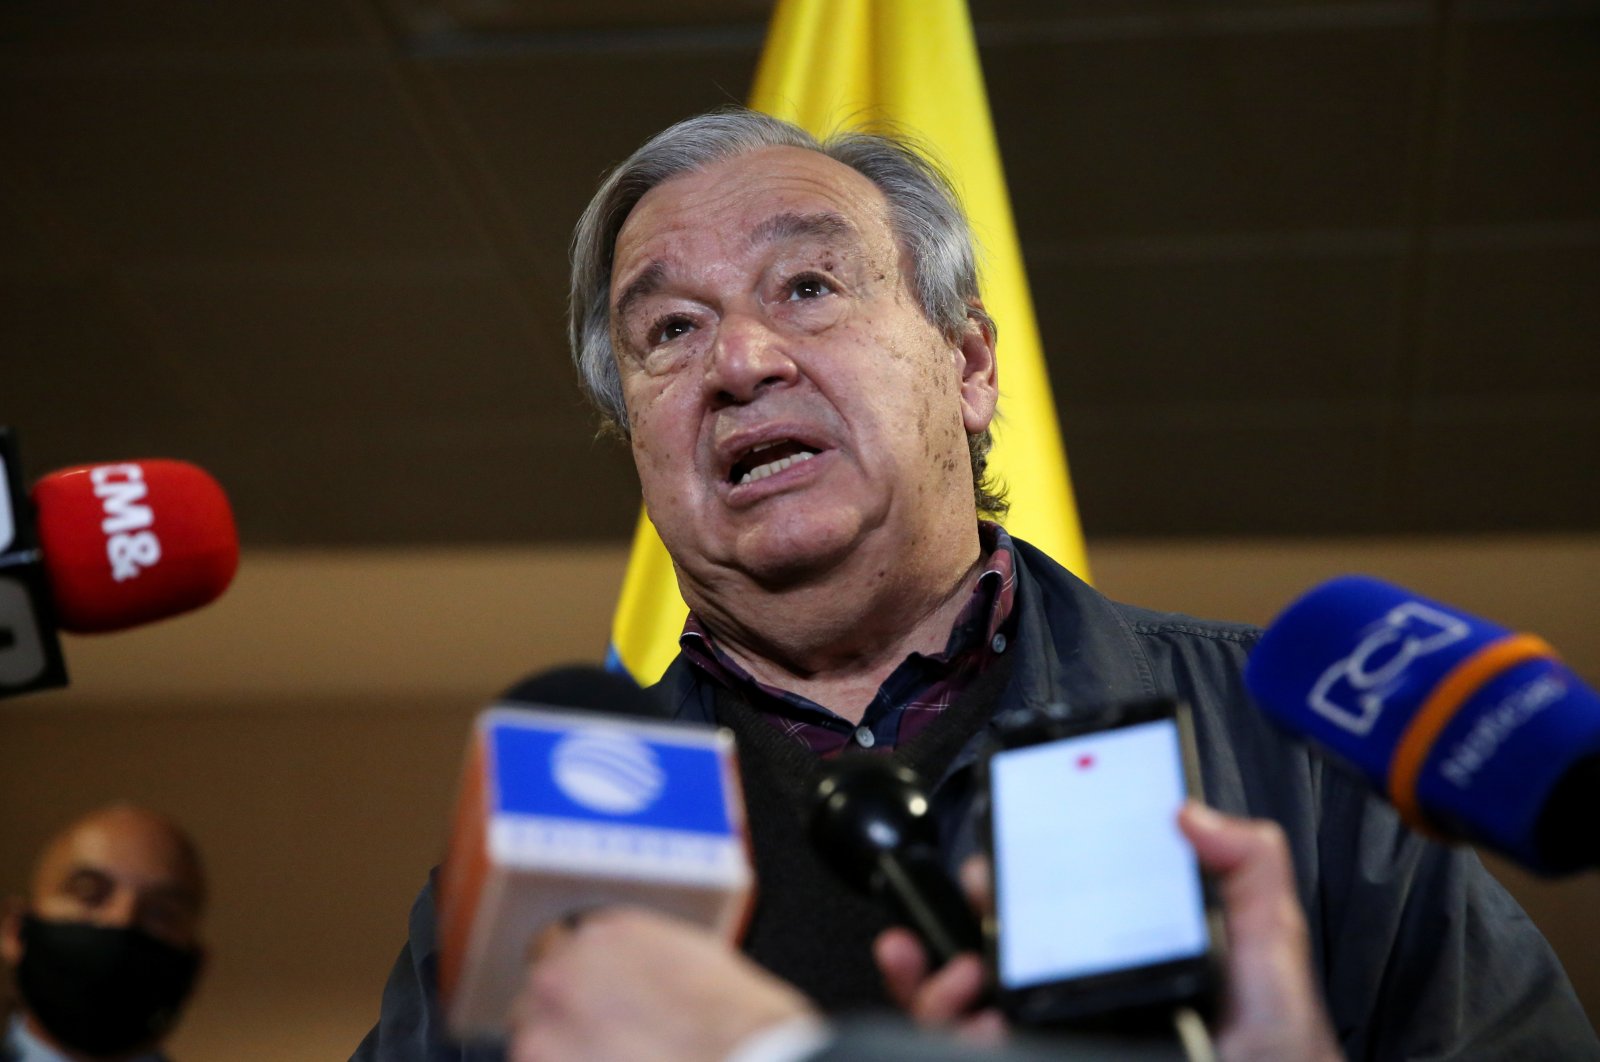 United Nations Secretary General Antonio Guterres speaks to the press as he arrives in Colombia to commemorate the fifth anniversary of the signing of the peace agreement between the Colombian government and the Revolutionary Armed Forces of Colombia (FARC), in Bogota, Colombia, Nov. 22, 2021. (Reuters File Photo)